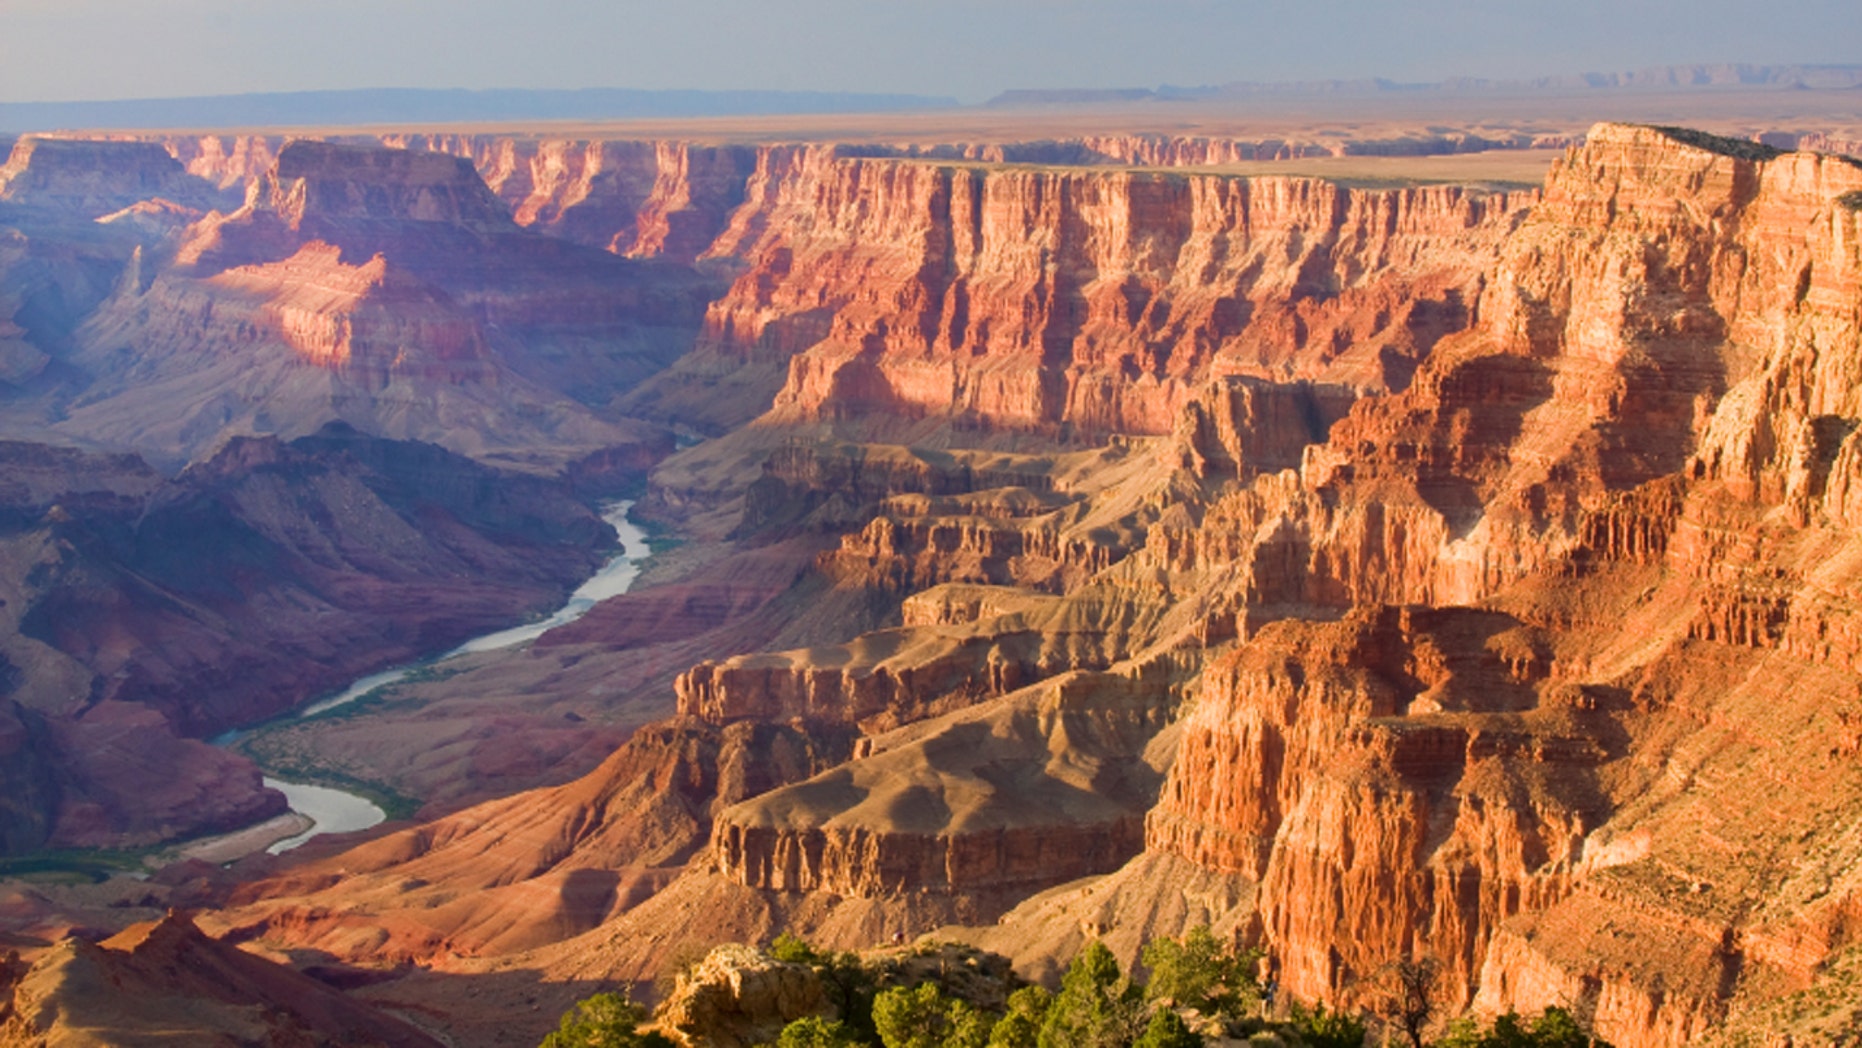 Christian geologist sues Grand Canyon for religious discrimination